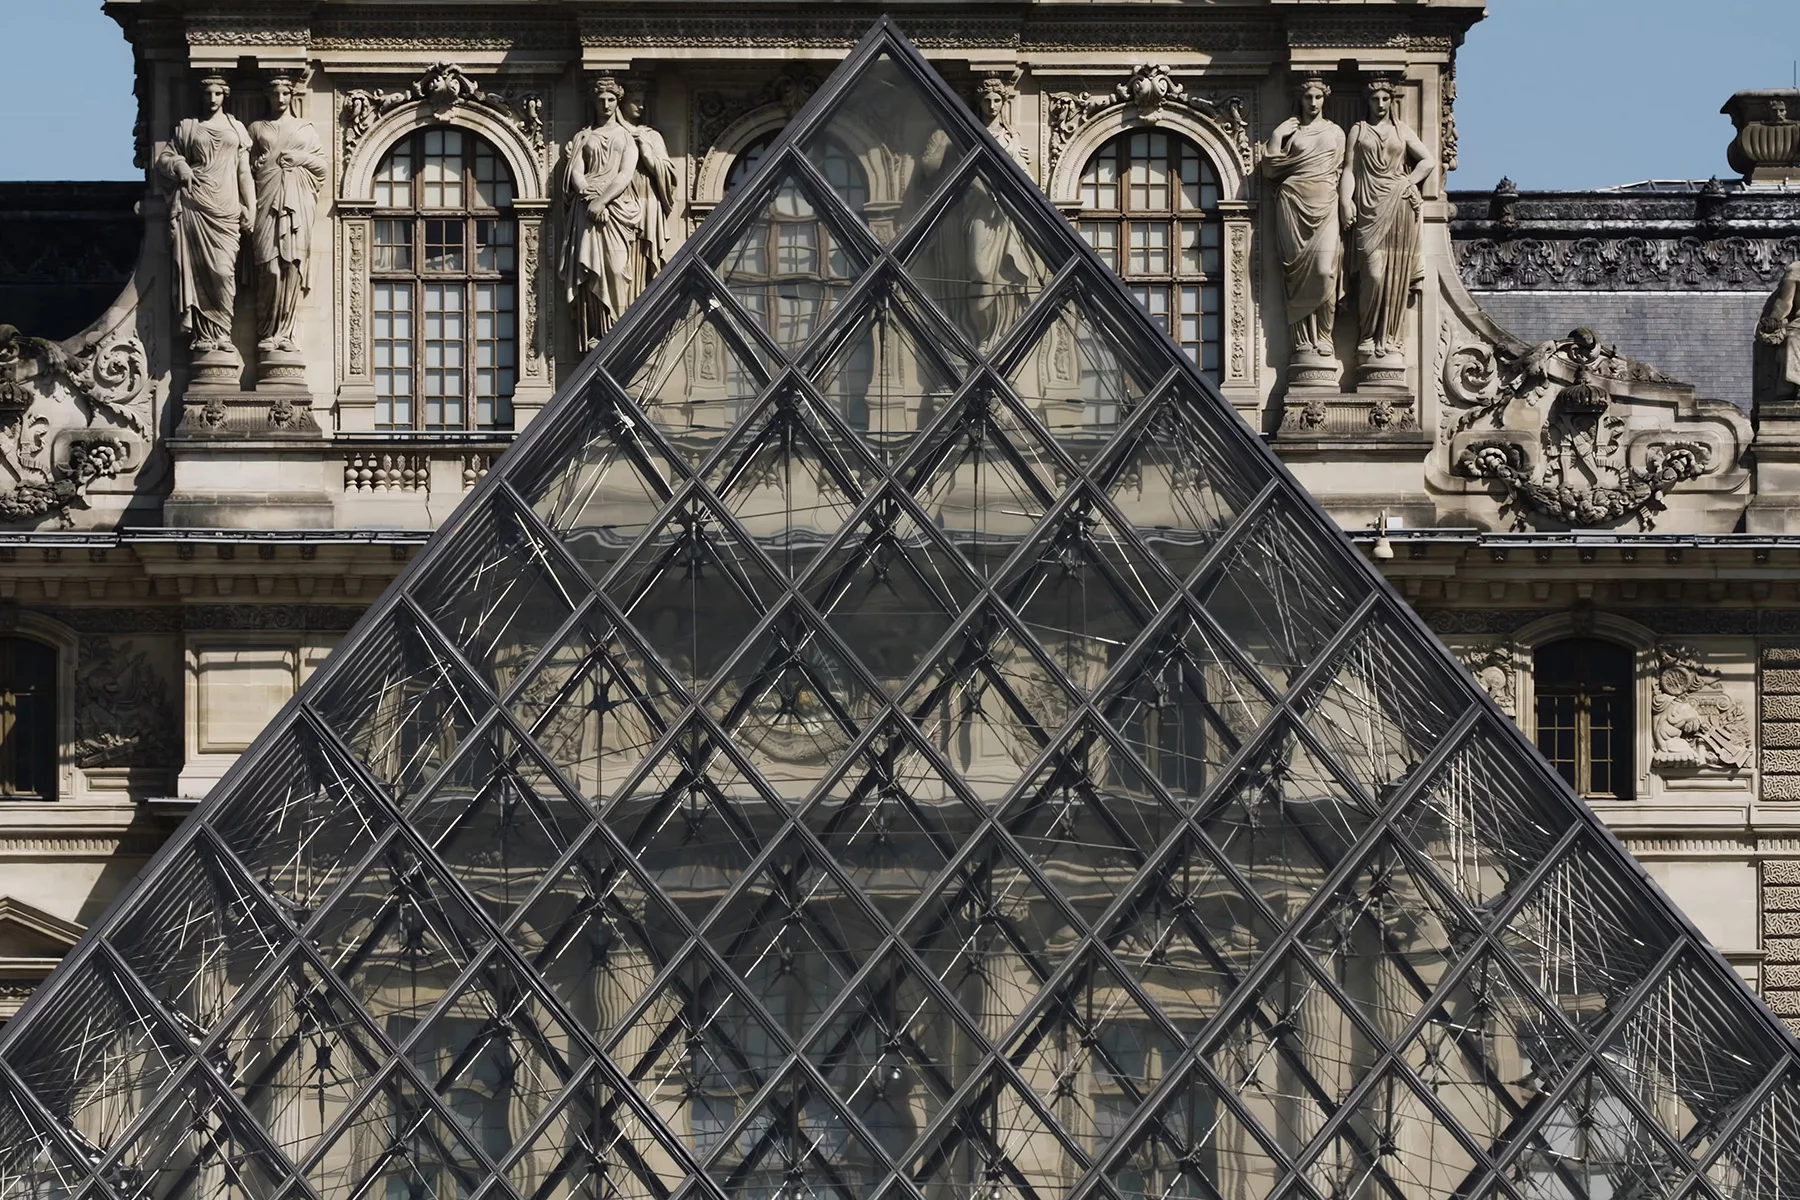 The famous glass pyramid of Le Louvre